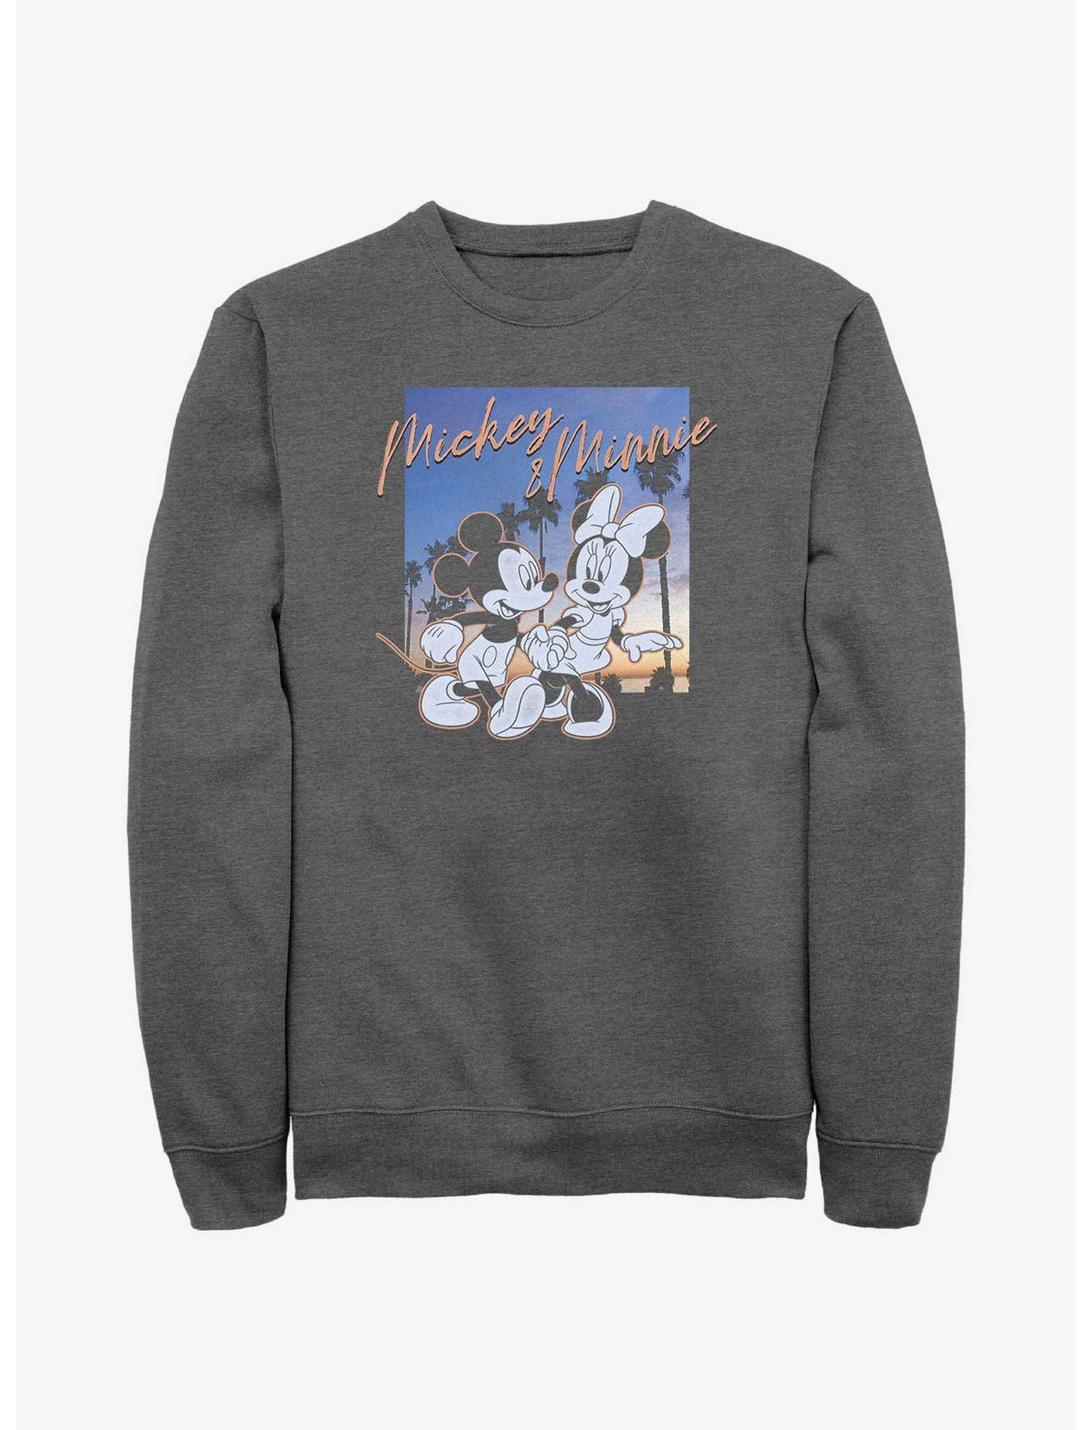 Disney Mickey Mouse & Minnie Mouse Sunset Couple Sweatshirt, CHAR HTR, hi-res